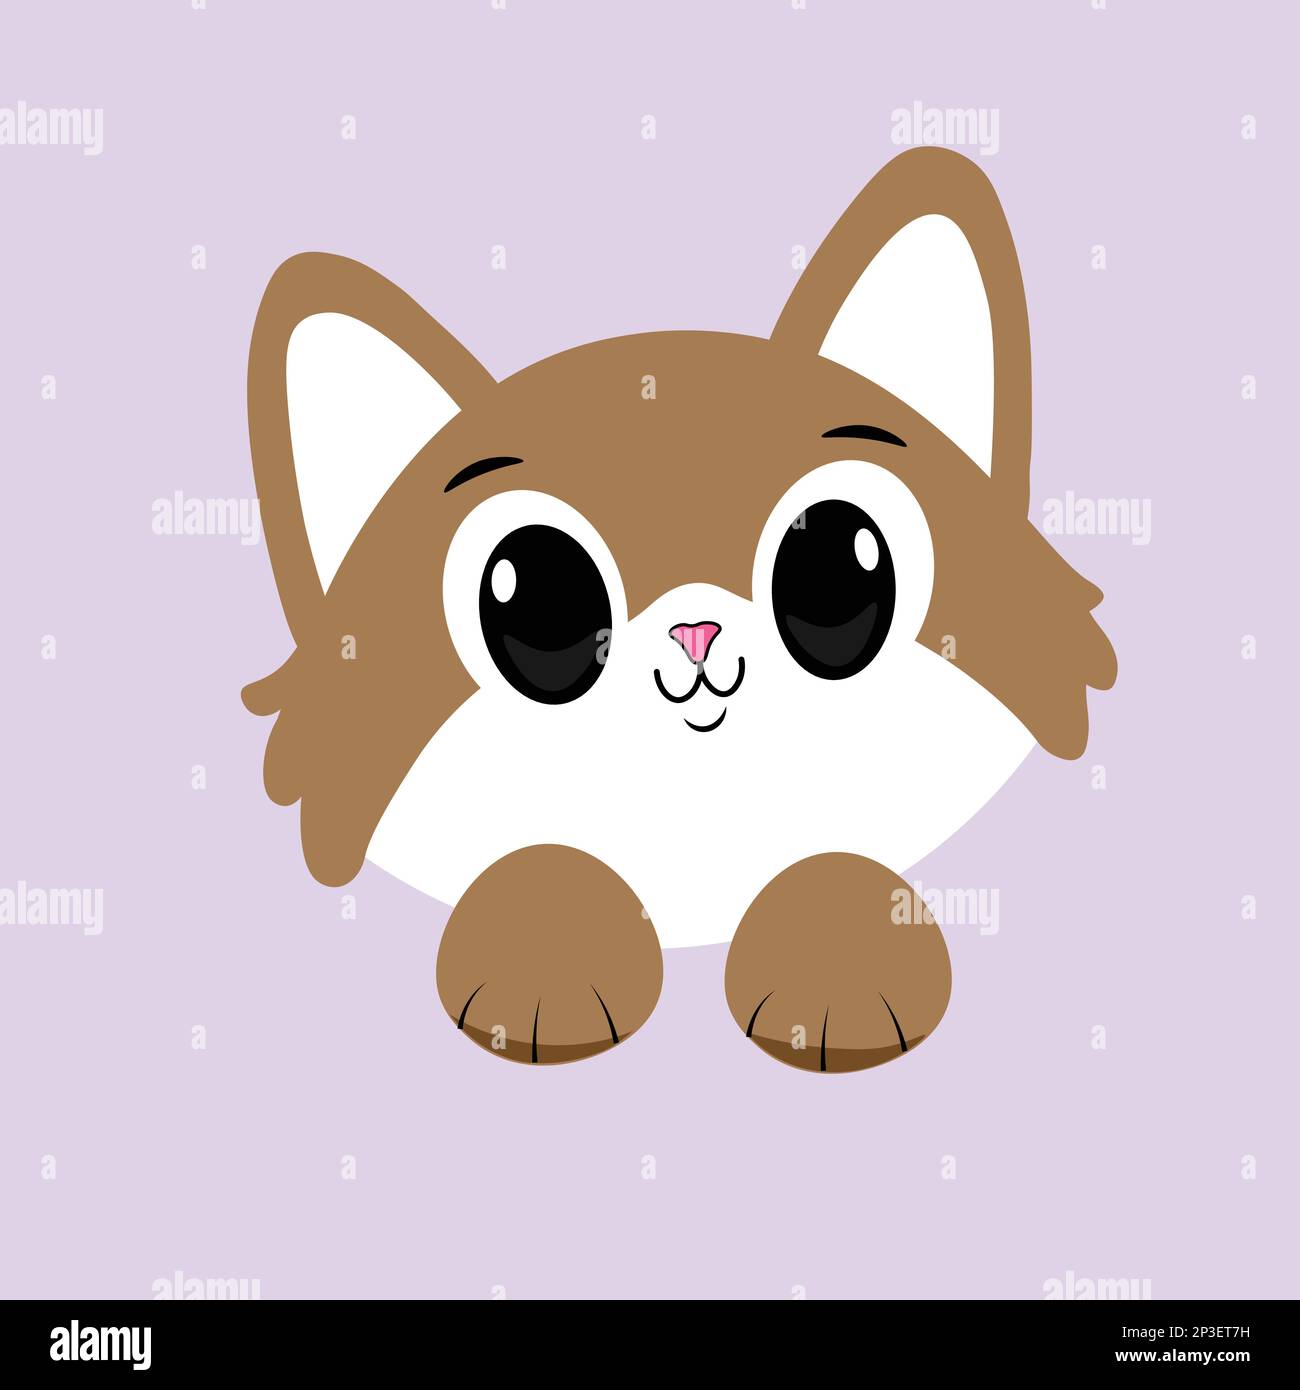 Cute gray cat paws up over wall cartoon, vector illustration Stock Vector